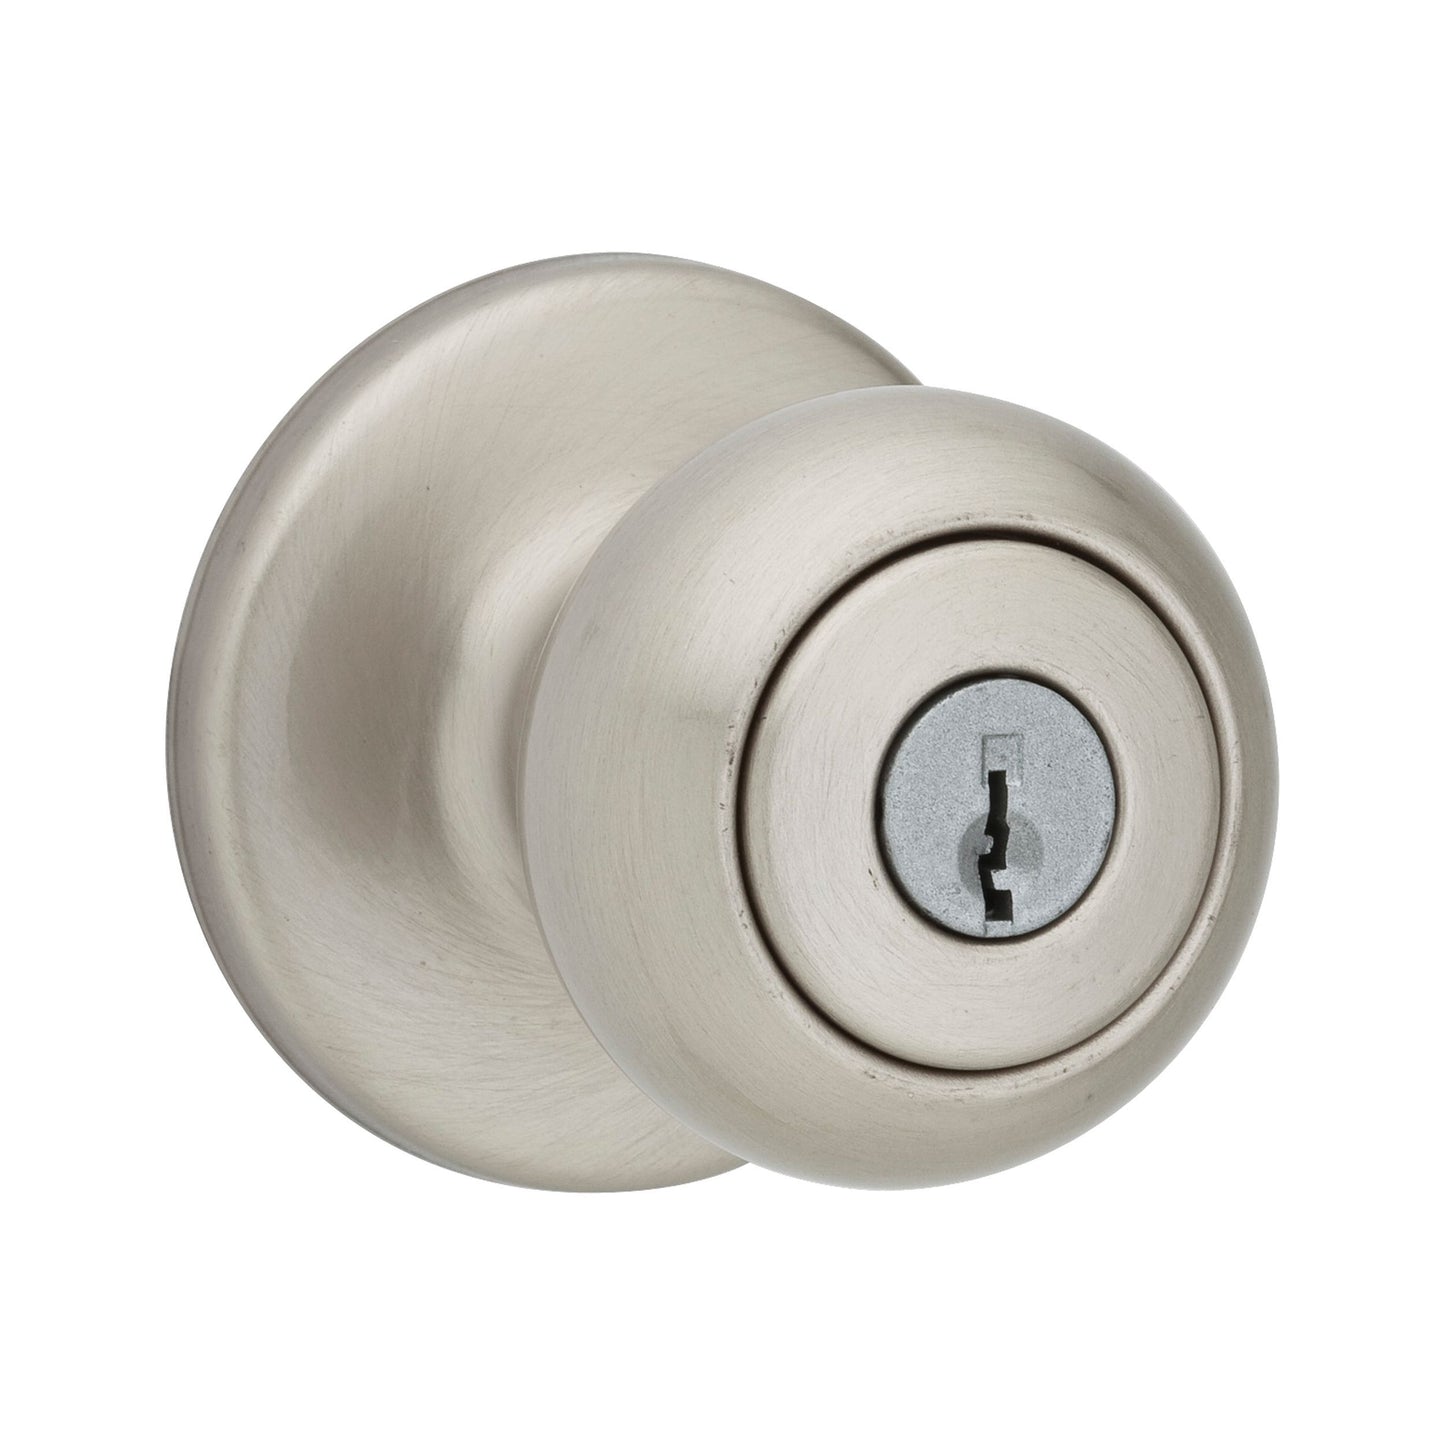 Kwikset 400CV-15V1 Cove Knob Entry Door Lock with New Chassis with 6AL Latch and RCS Strike Satin Nickel Finish